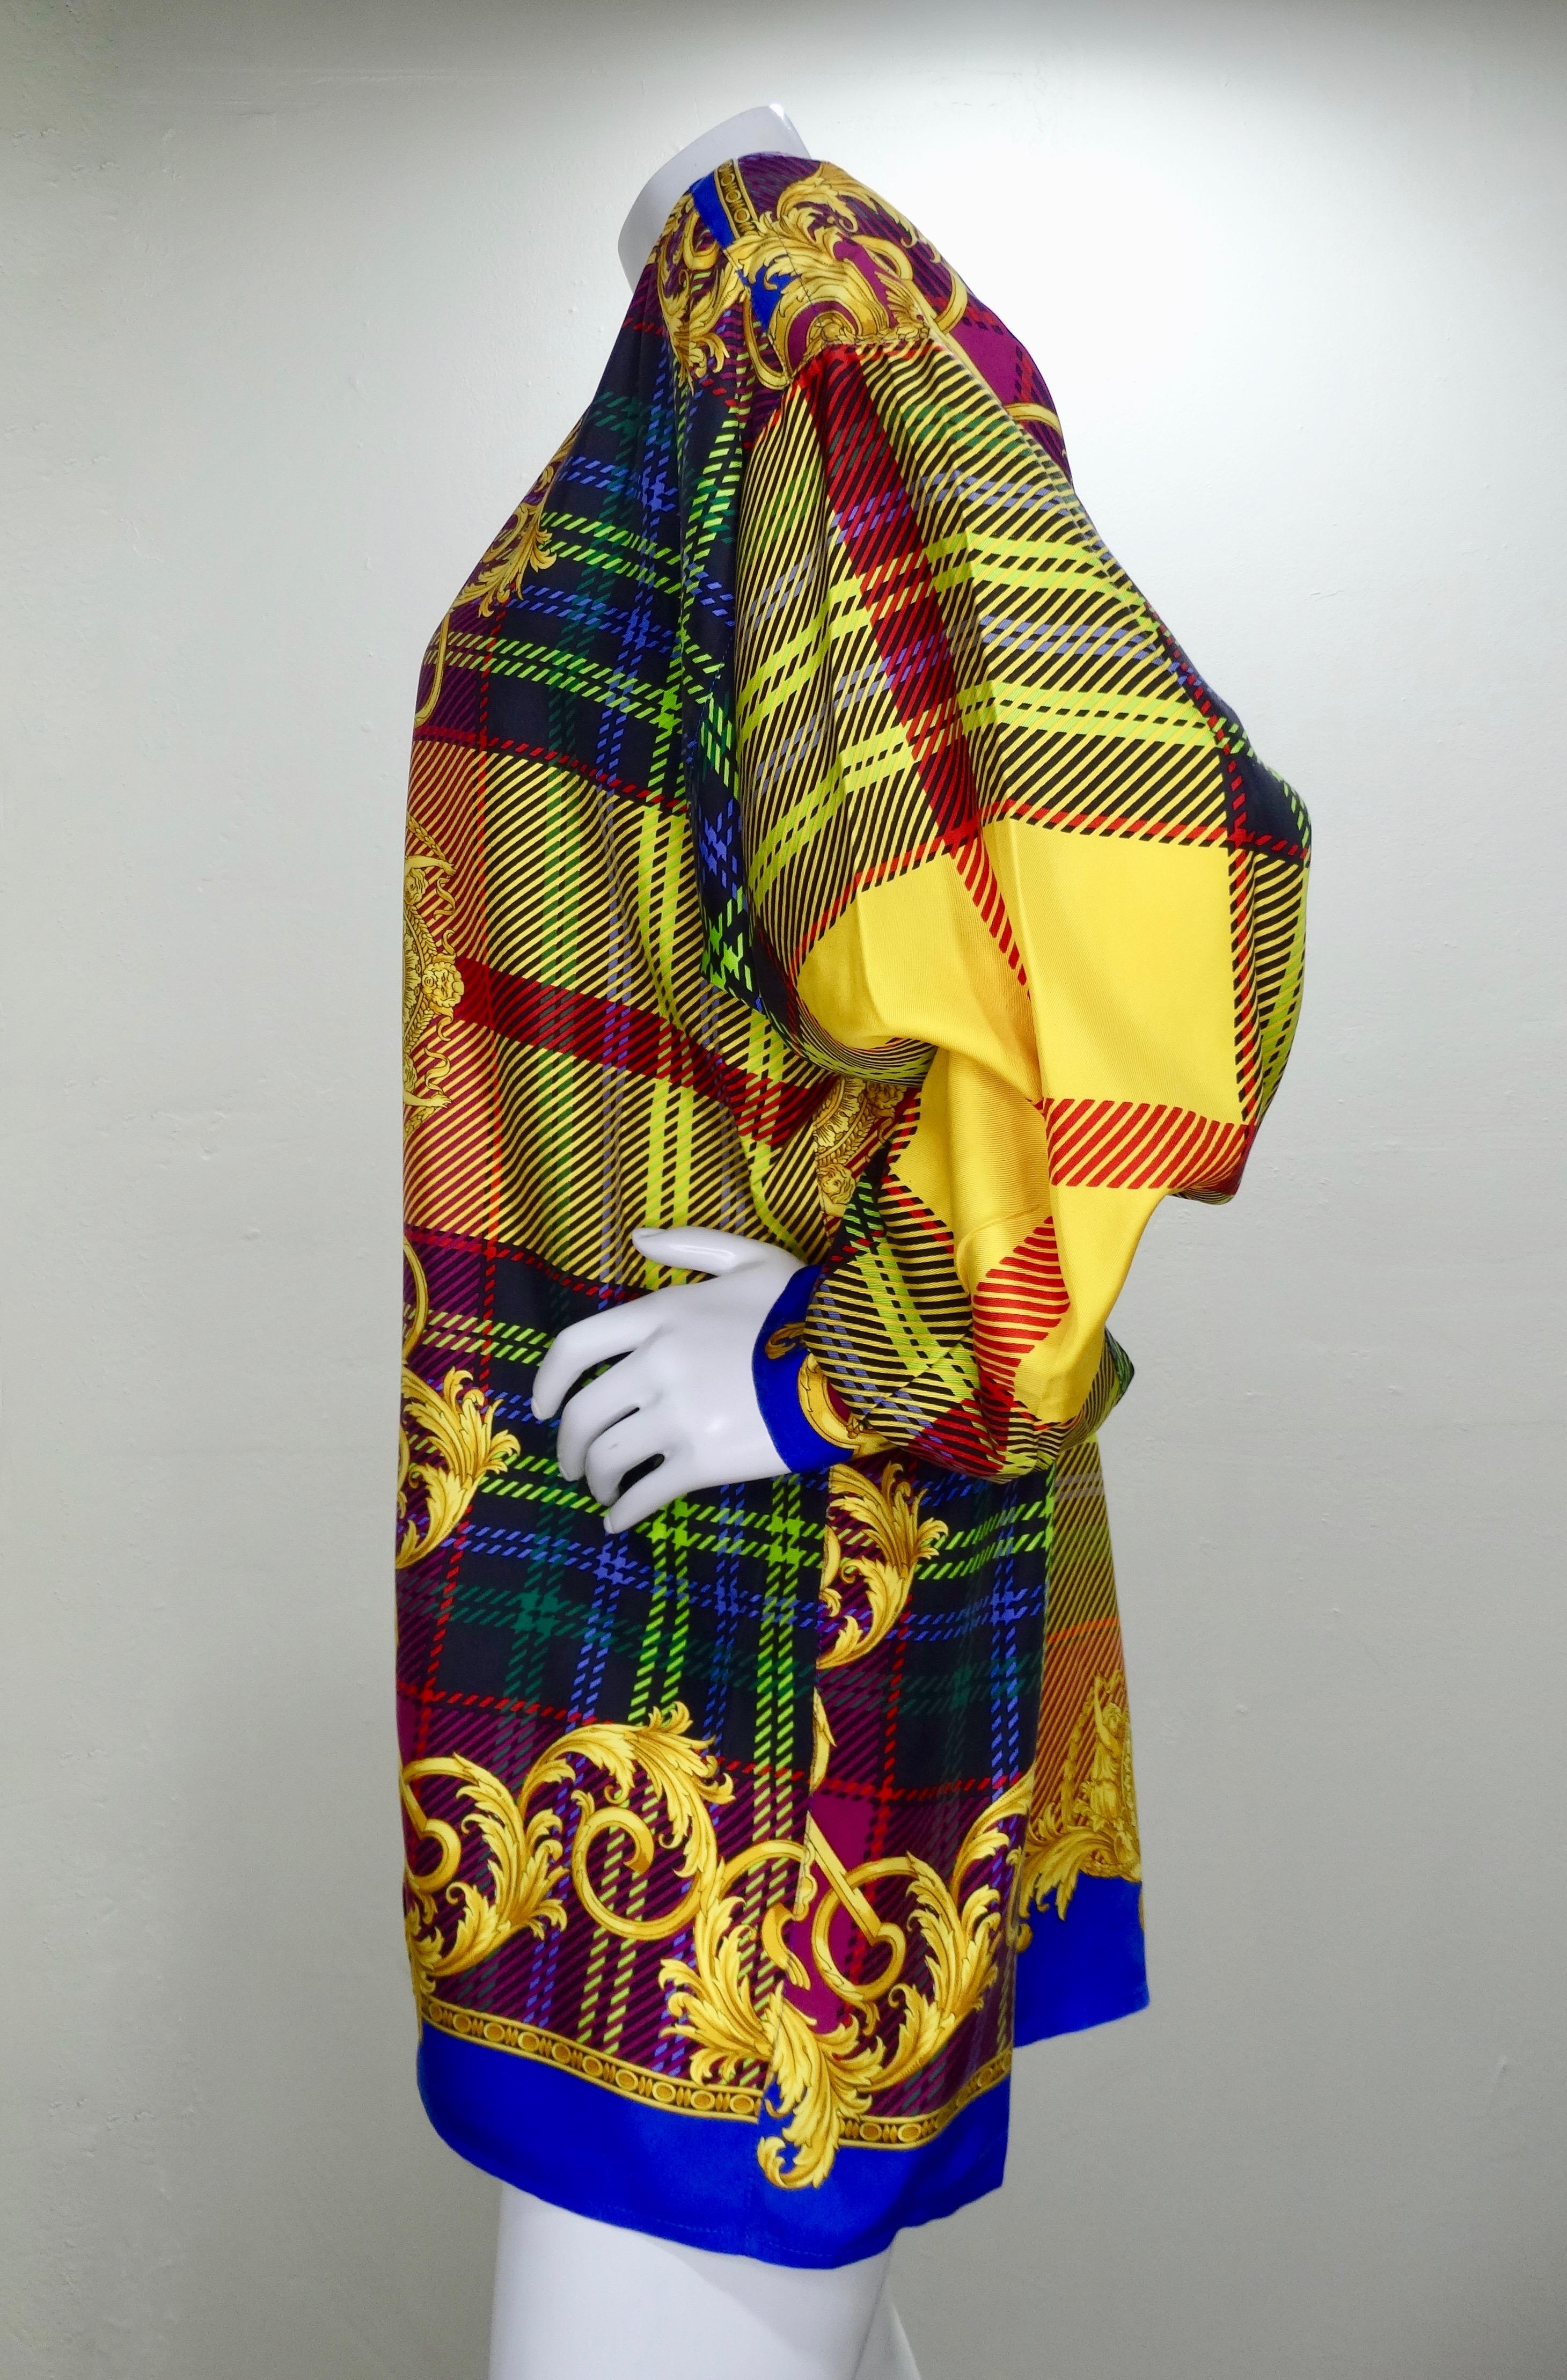 Gianni Versace 1990s Multi-Colored Plaid Silk Shirt  In Good Condition For Sale In Scottsdale, AZ